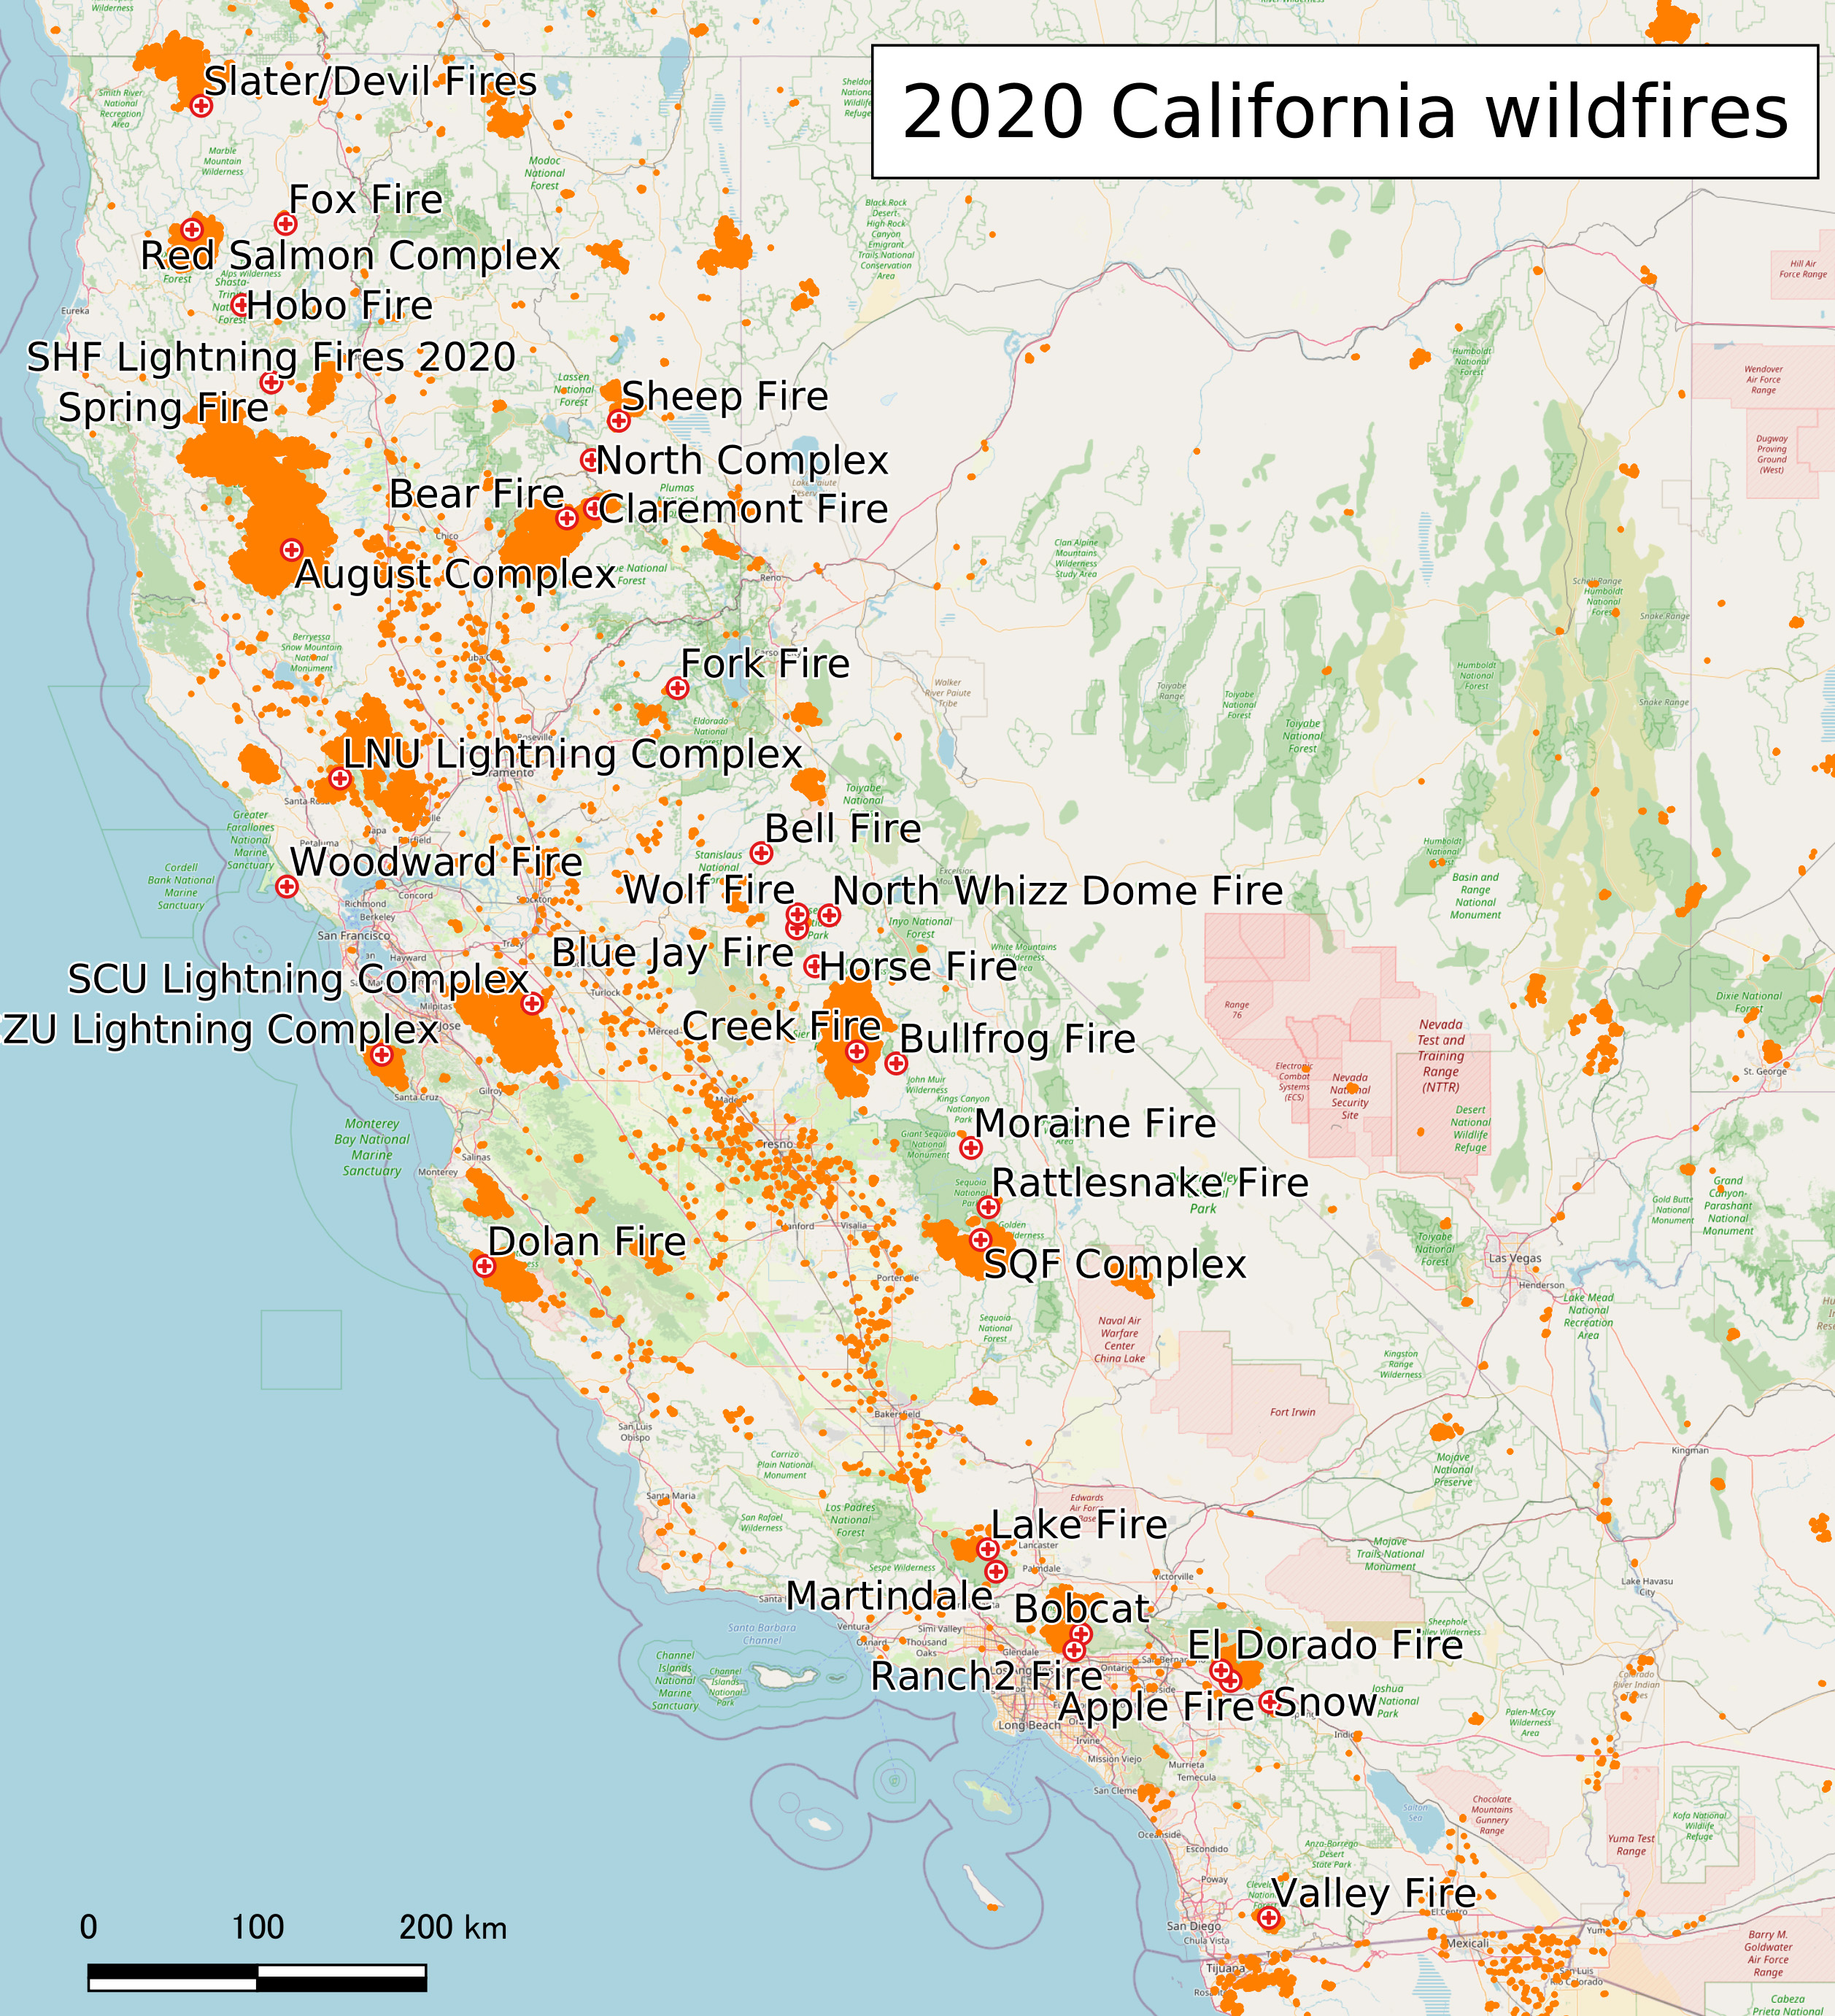 A map of California with red spots showing wildfire locations